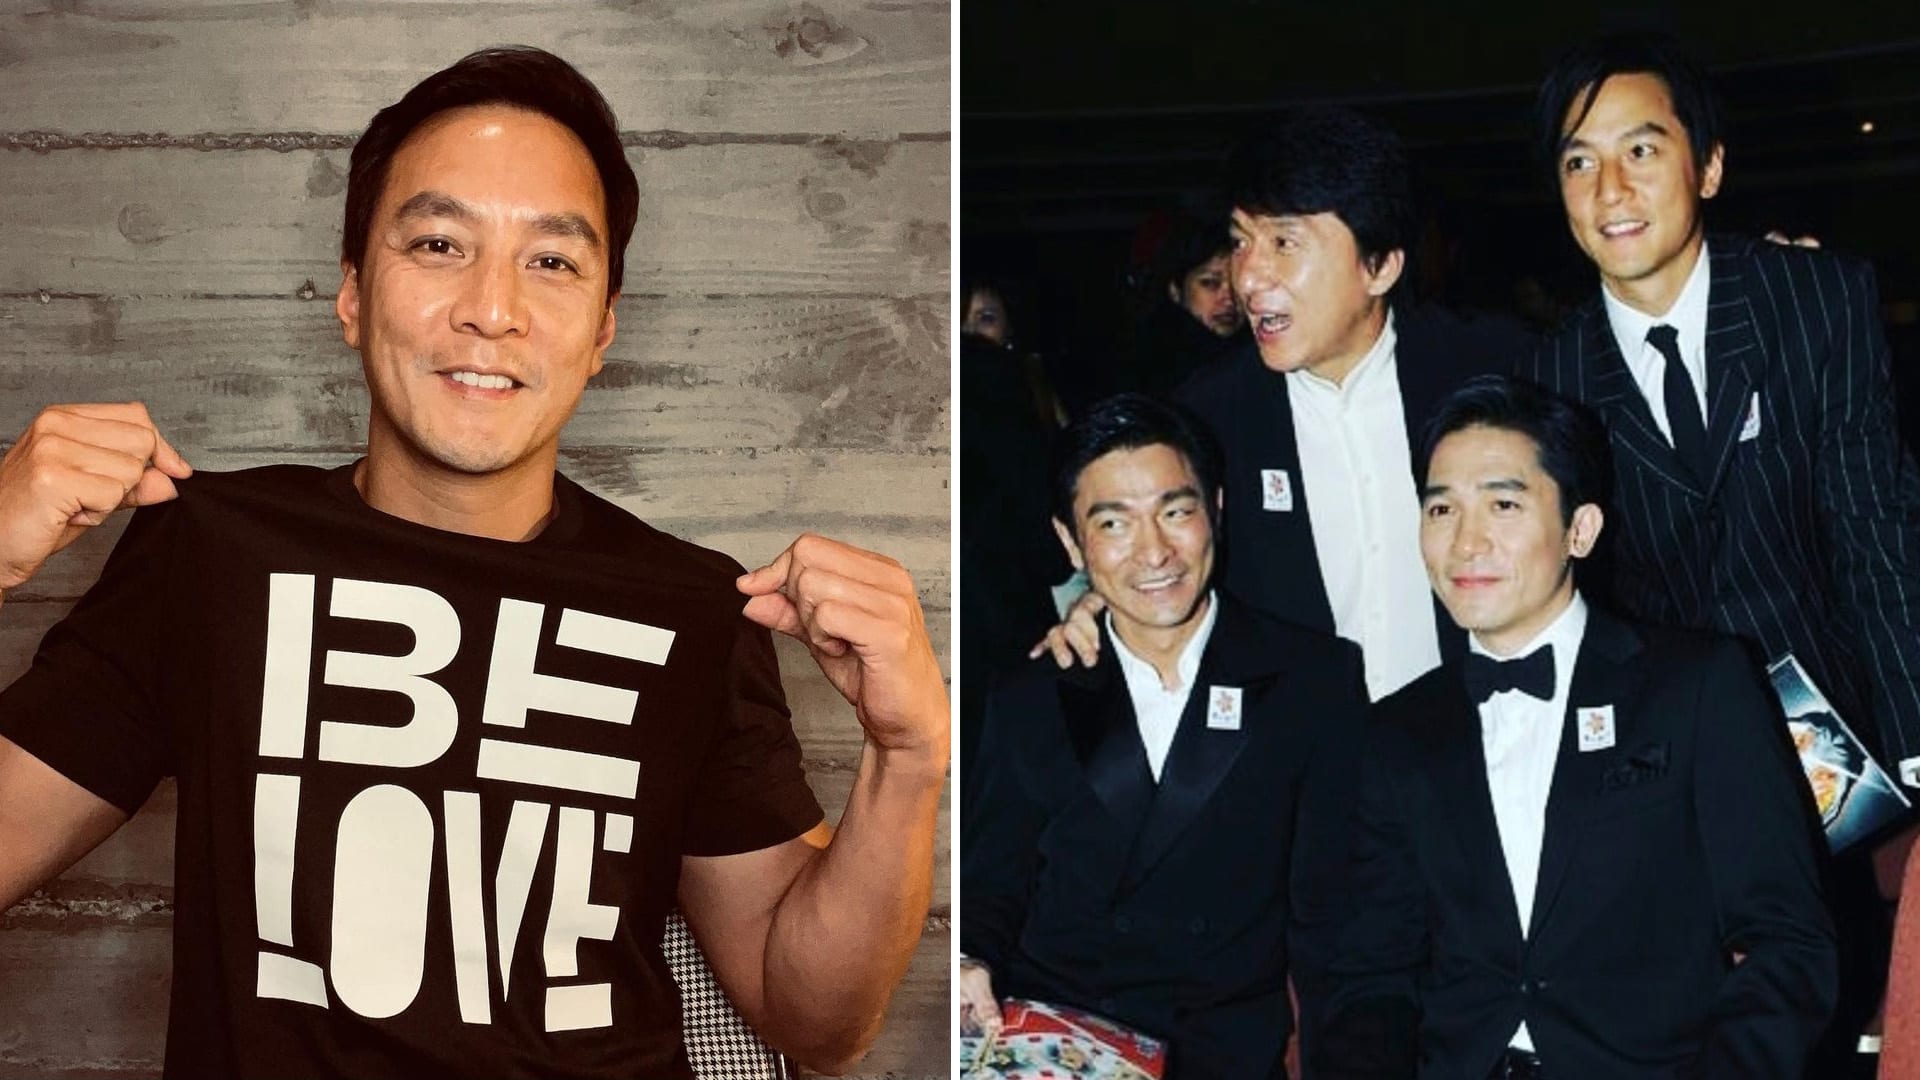 Daniel Wu Says This Throwback Pic With Jackie Chan, Andy Lau & Tony Leung Was Taken Around 15 Years Ago ‘Cos Of “How Much Hair [He] Had”